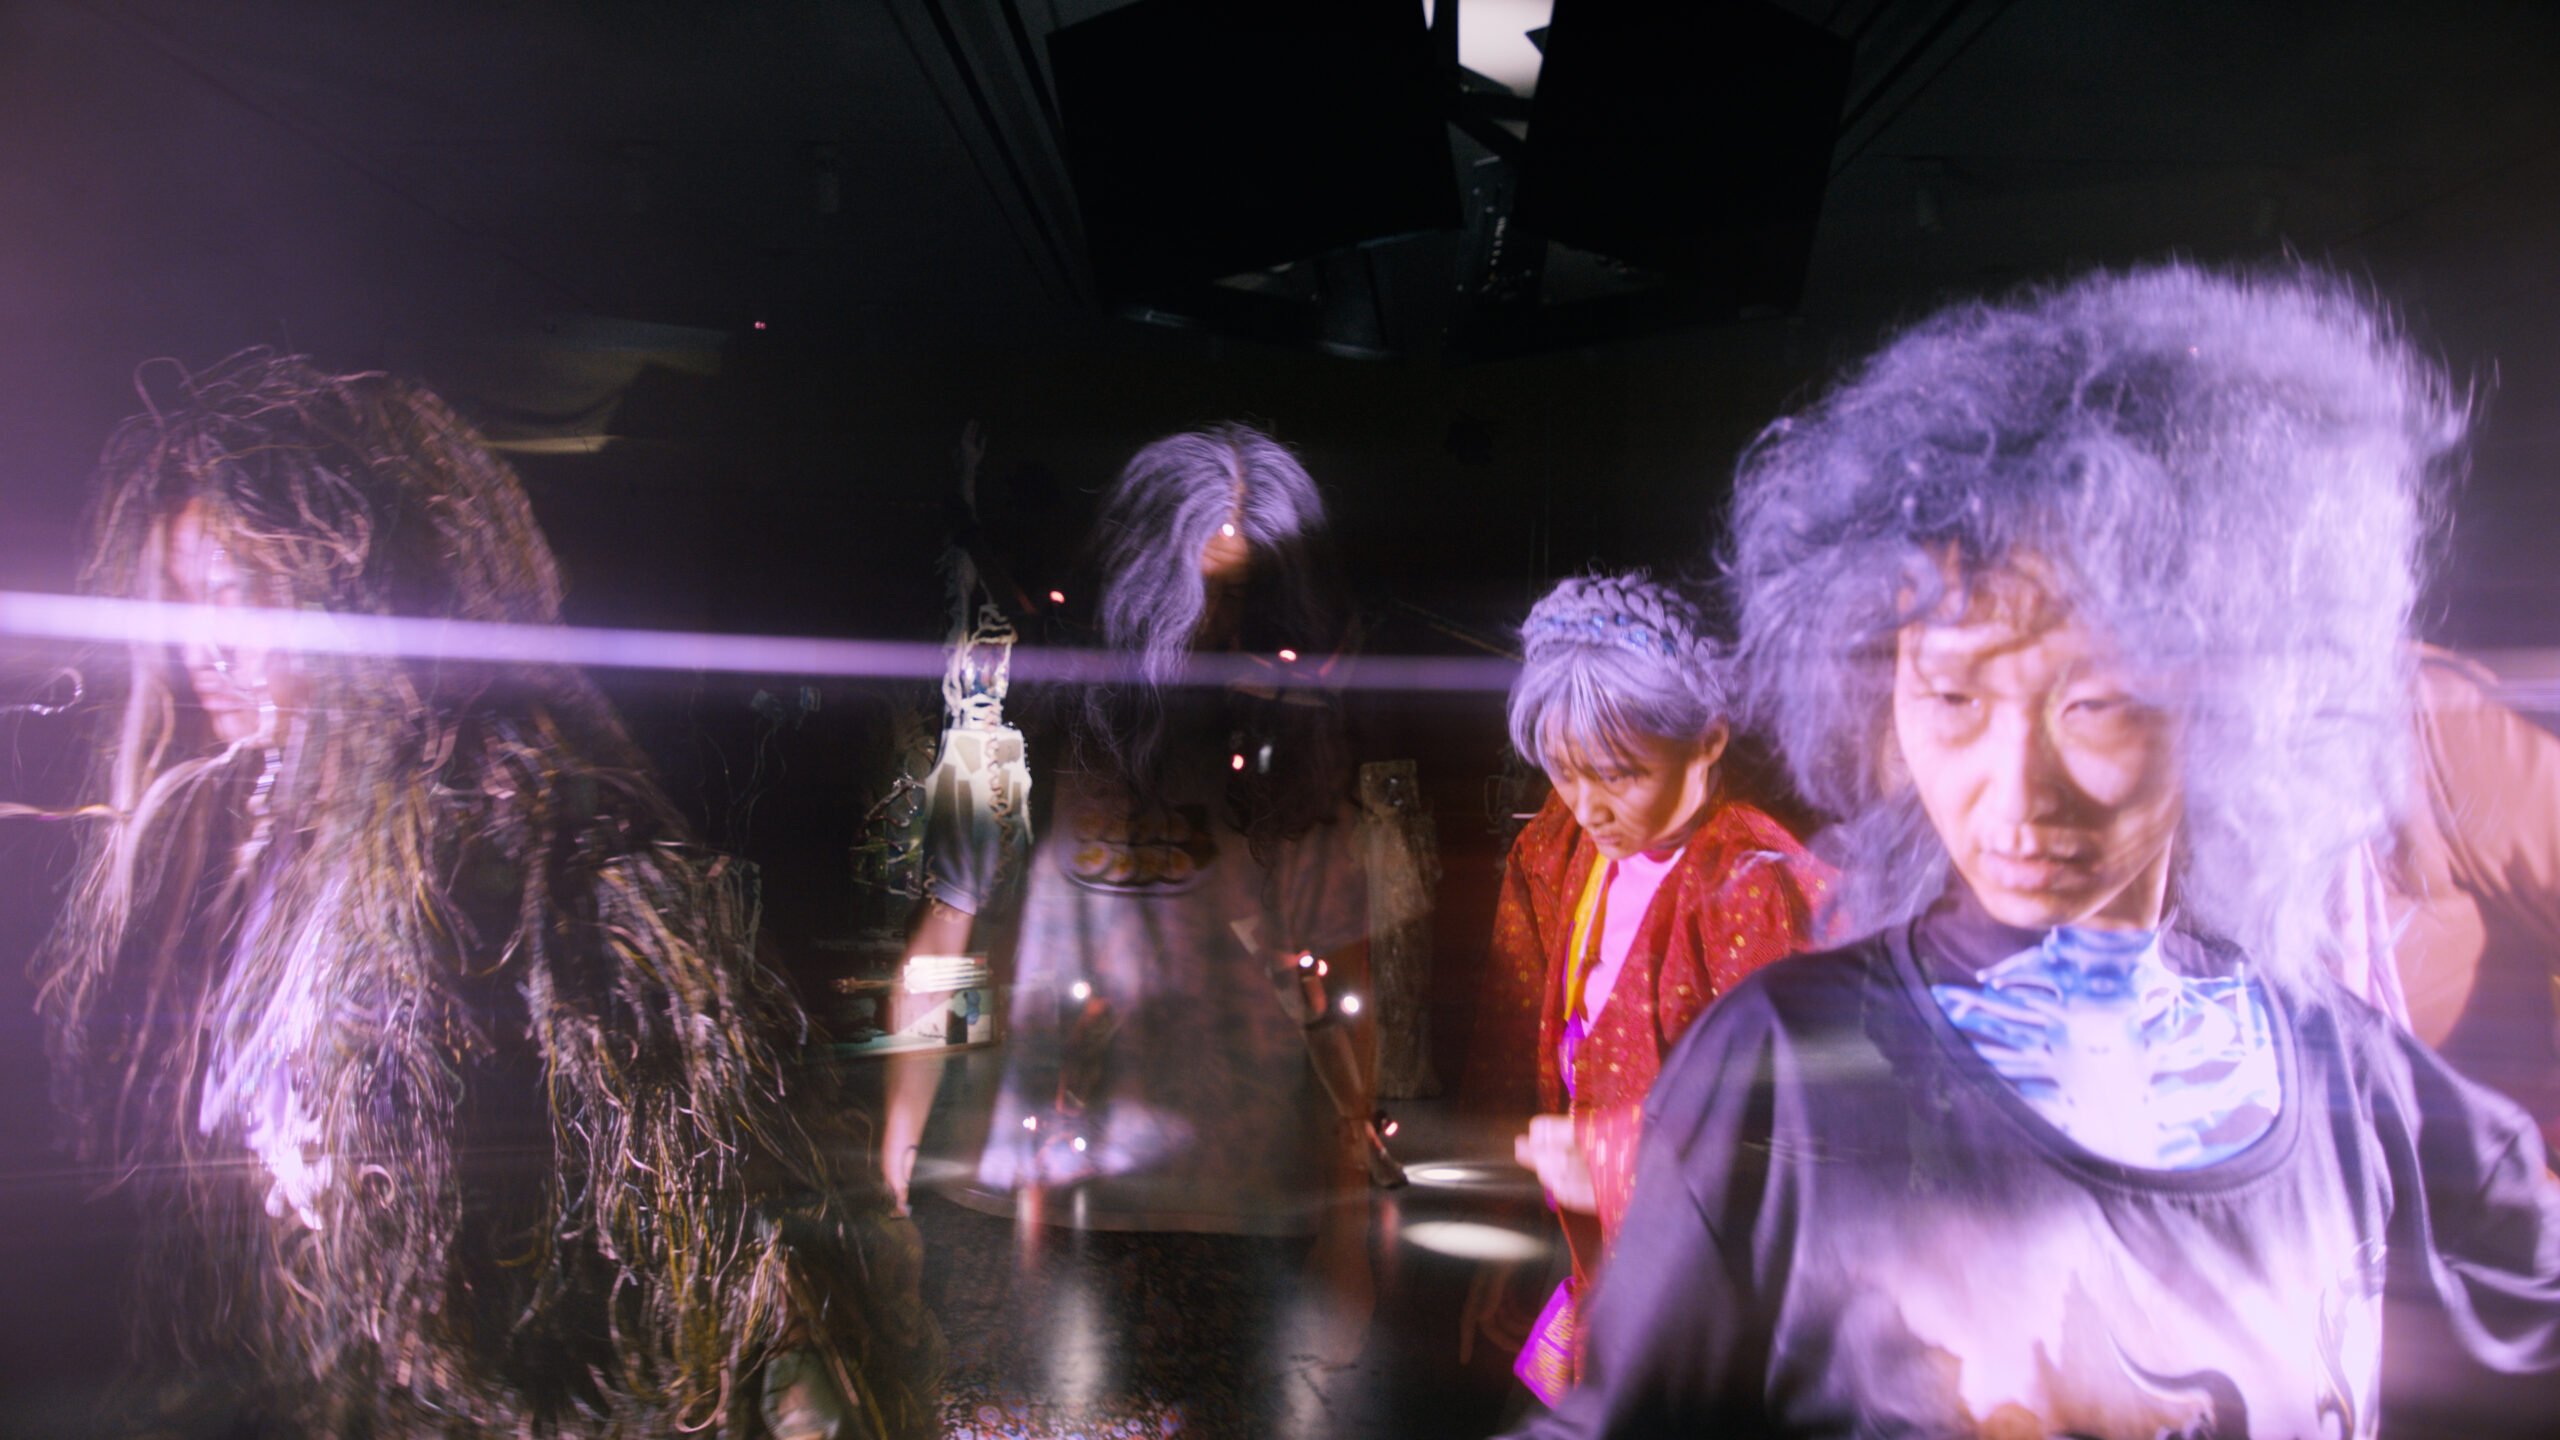 A dark empty gallery is overlaid with a ghostly images of four performers in old age makesup and wigs with blank stares.